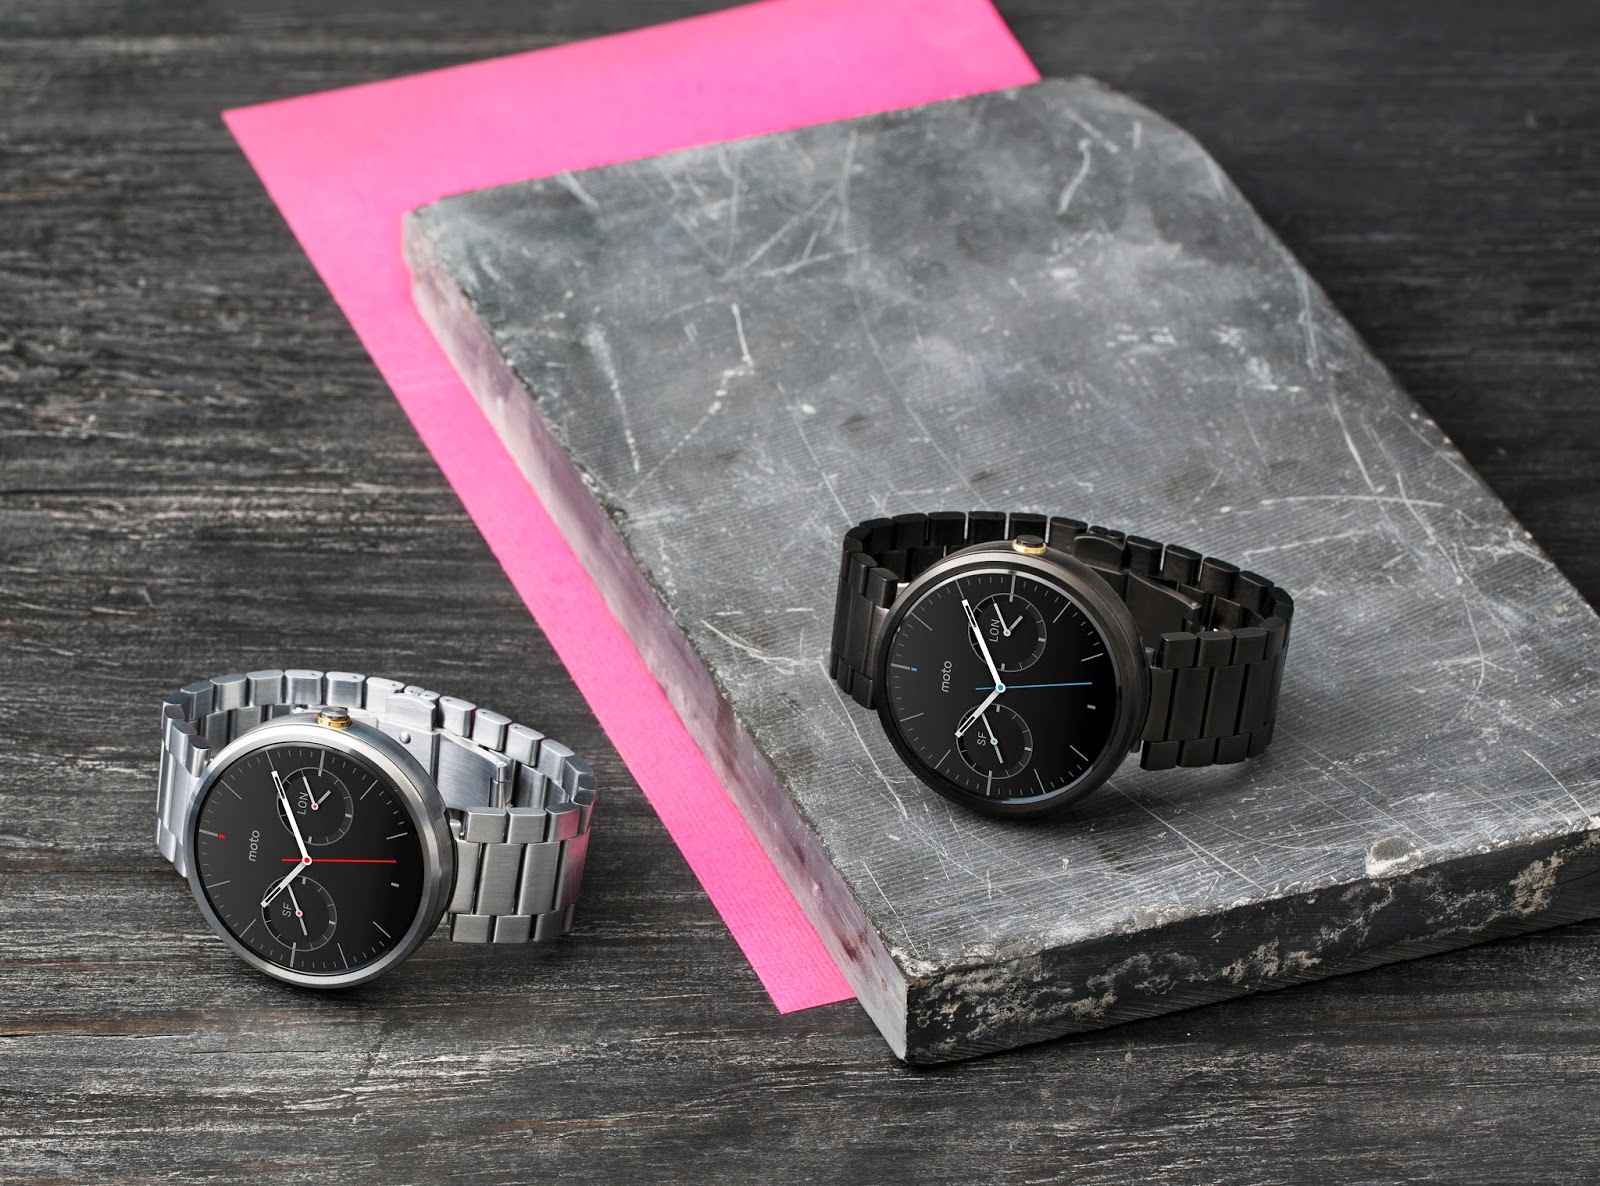 Moto 360: Choose a watch that fits your style